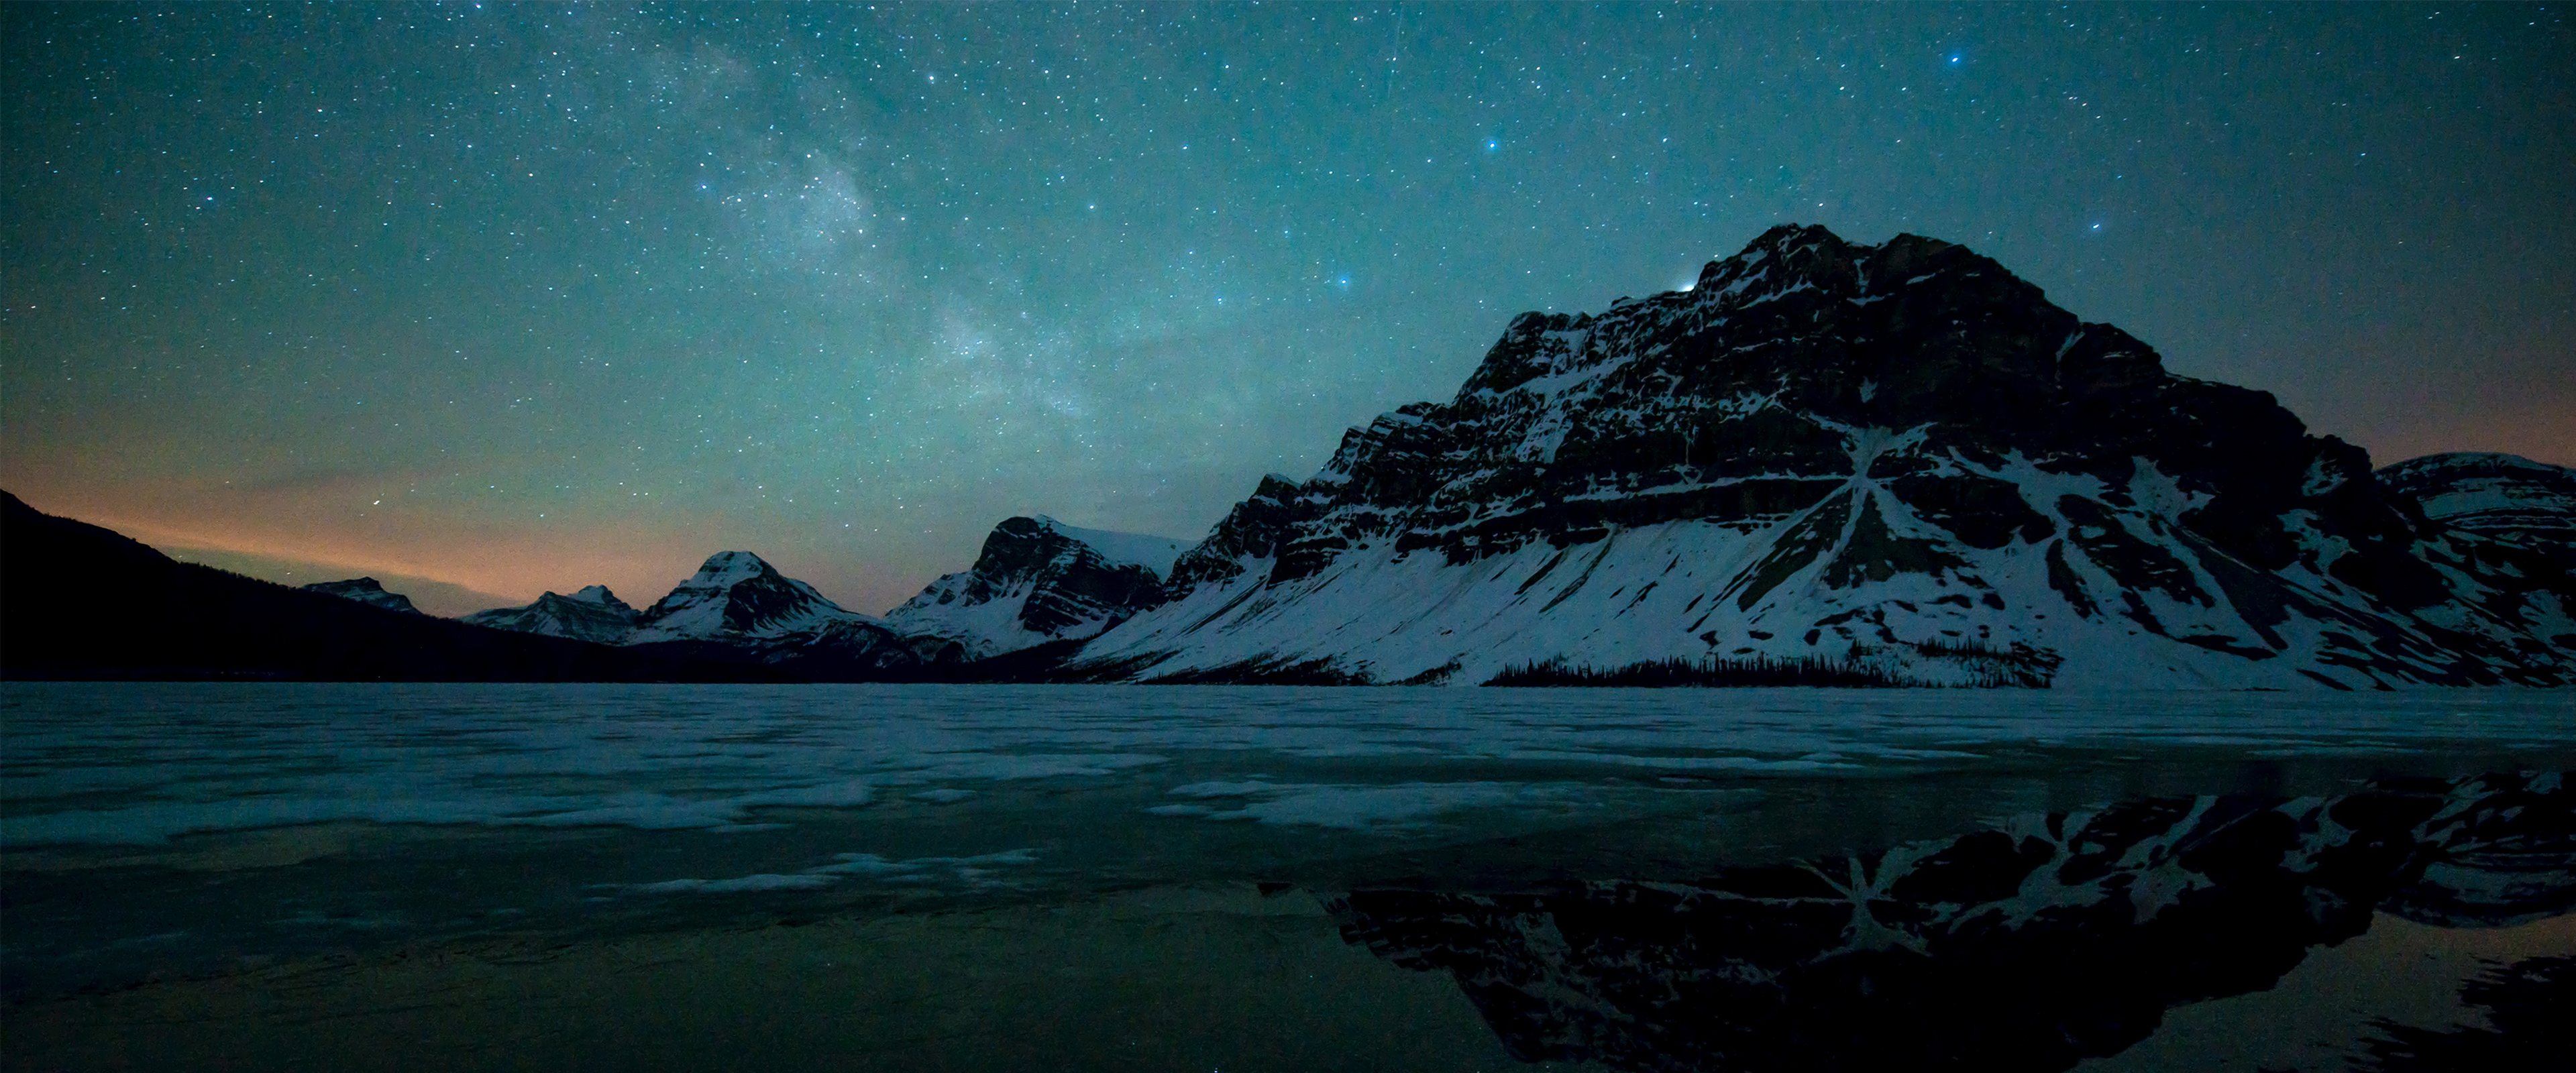 General 3840x1600 4K snow mountains stars starry night reflection